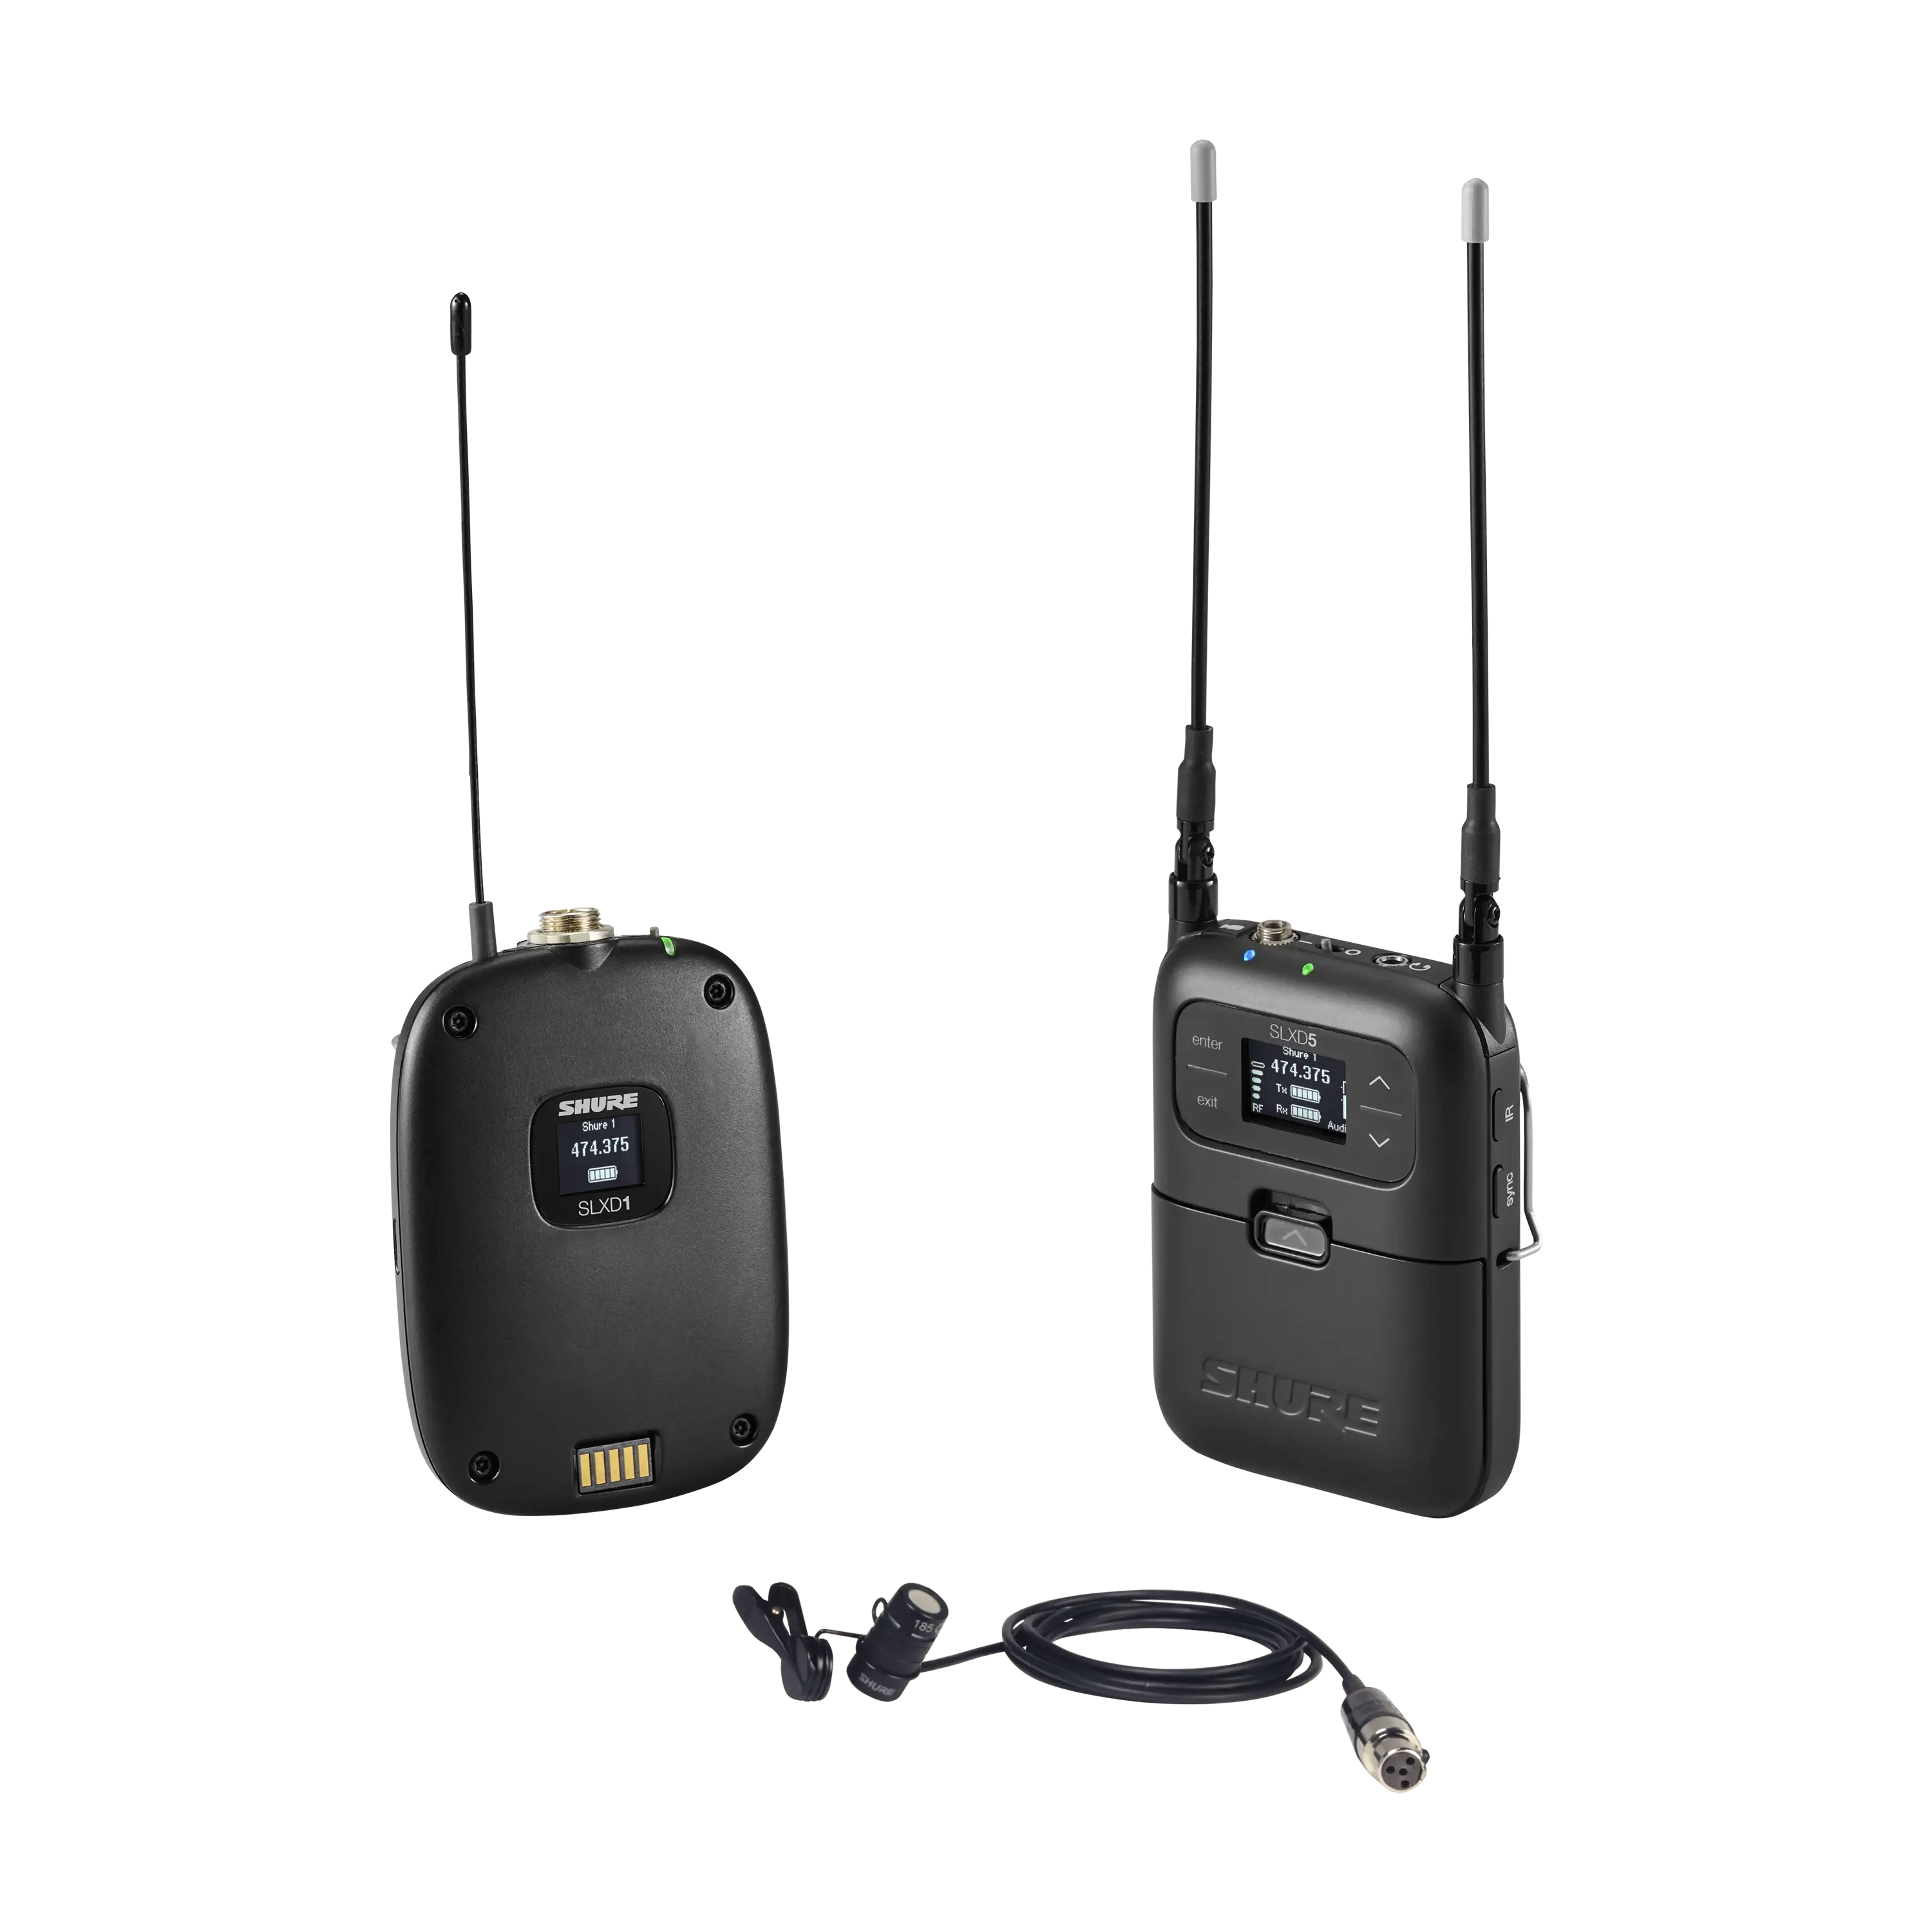 SLXD15/85-H55 Portable Wireless System With SLXD1 Bodypack Transmitter And WL185 Cardioid Lavalier Microphone